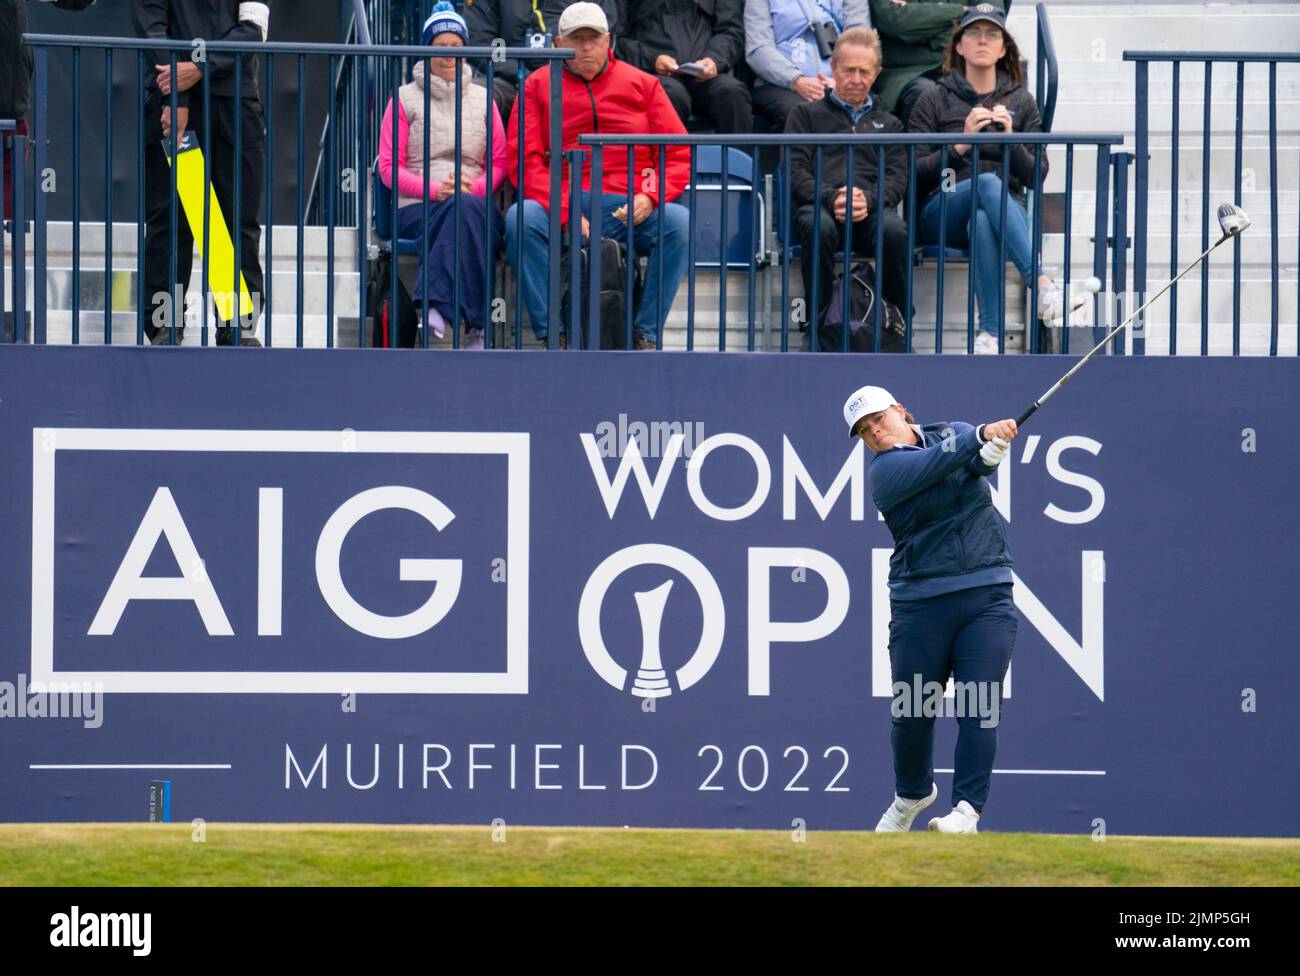 Gullane, Scotland, UK. 7th August 2022. Final  round of the AIG Women’s Open golf championship at Muirfield in East Lothian. Pic; Lydia Hall tees off at the first hole.  Iain Masterton/Alamy Live News Stock Photo